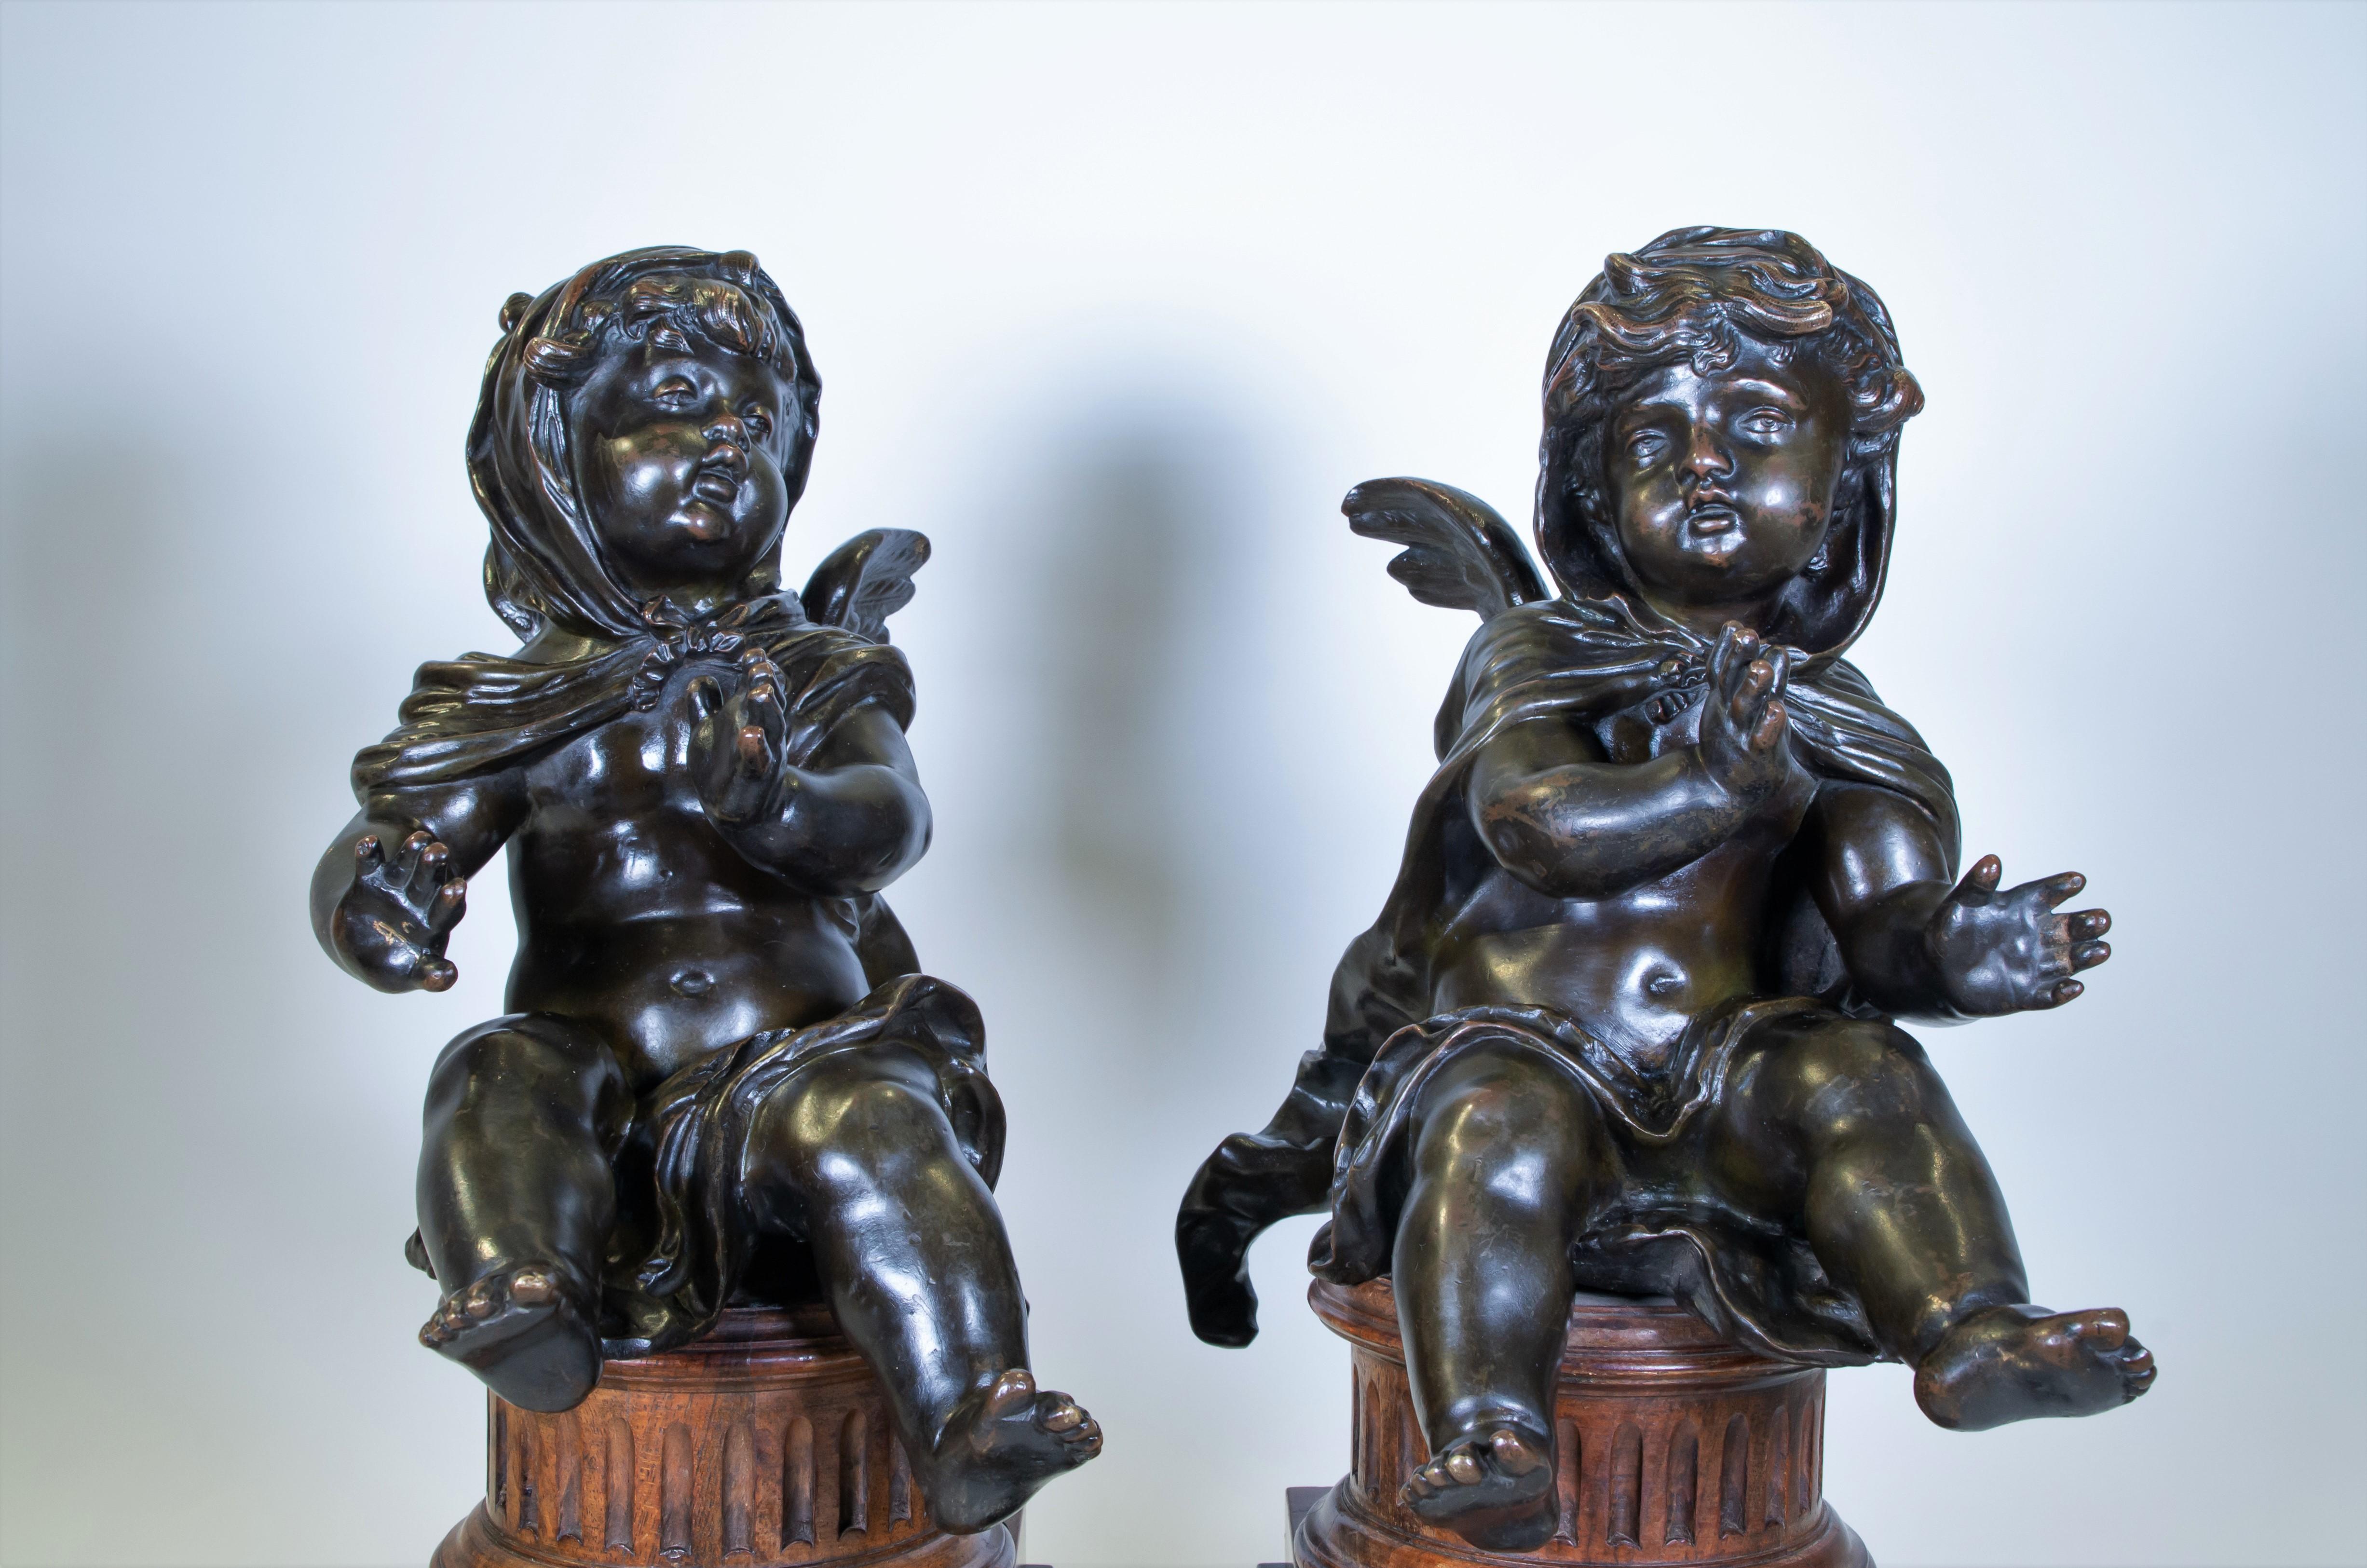 A Fabulous Pair of Antique French mid 1800s Louis XVI Style Patinated Bronze Putti Seated on Fluted Plinths. Each putti is seen seated with their arms and legs extended. They are both cloaked and winged with calming appearances. A dark brown patina